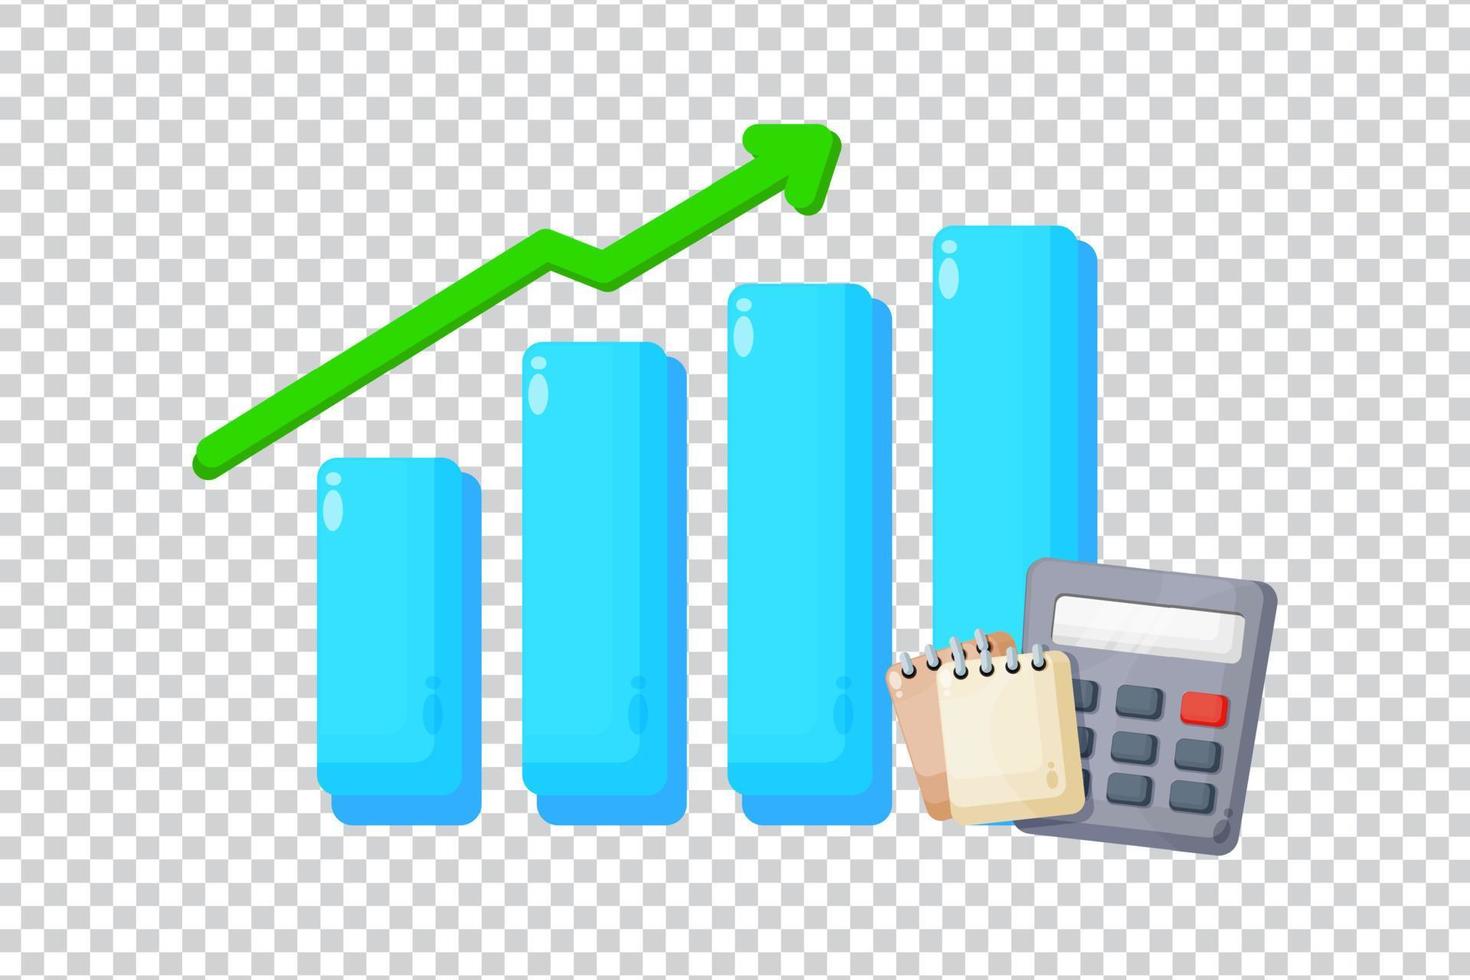 roi concept, return on investment, people managing financial charts on transparent background vector